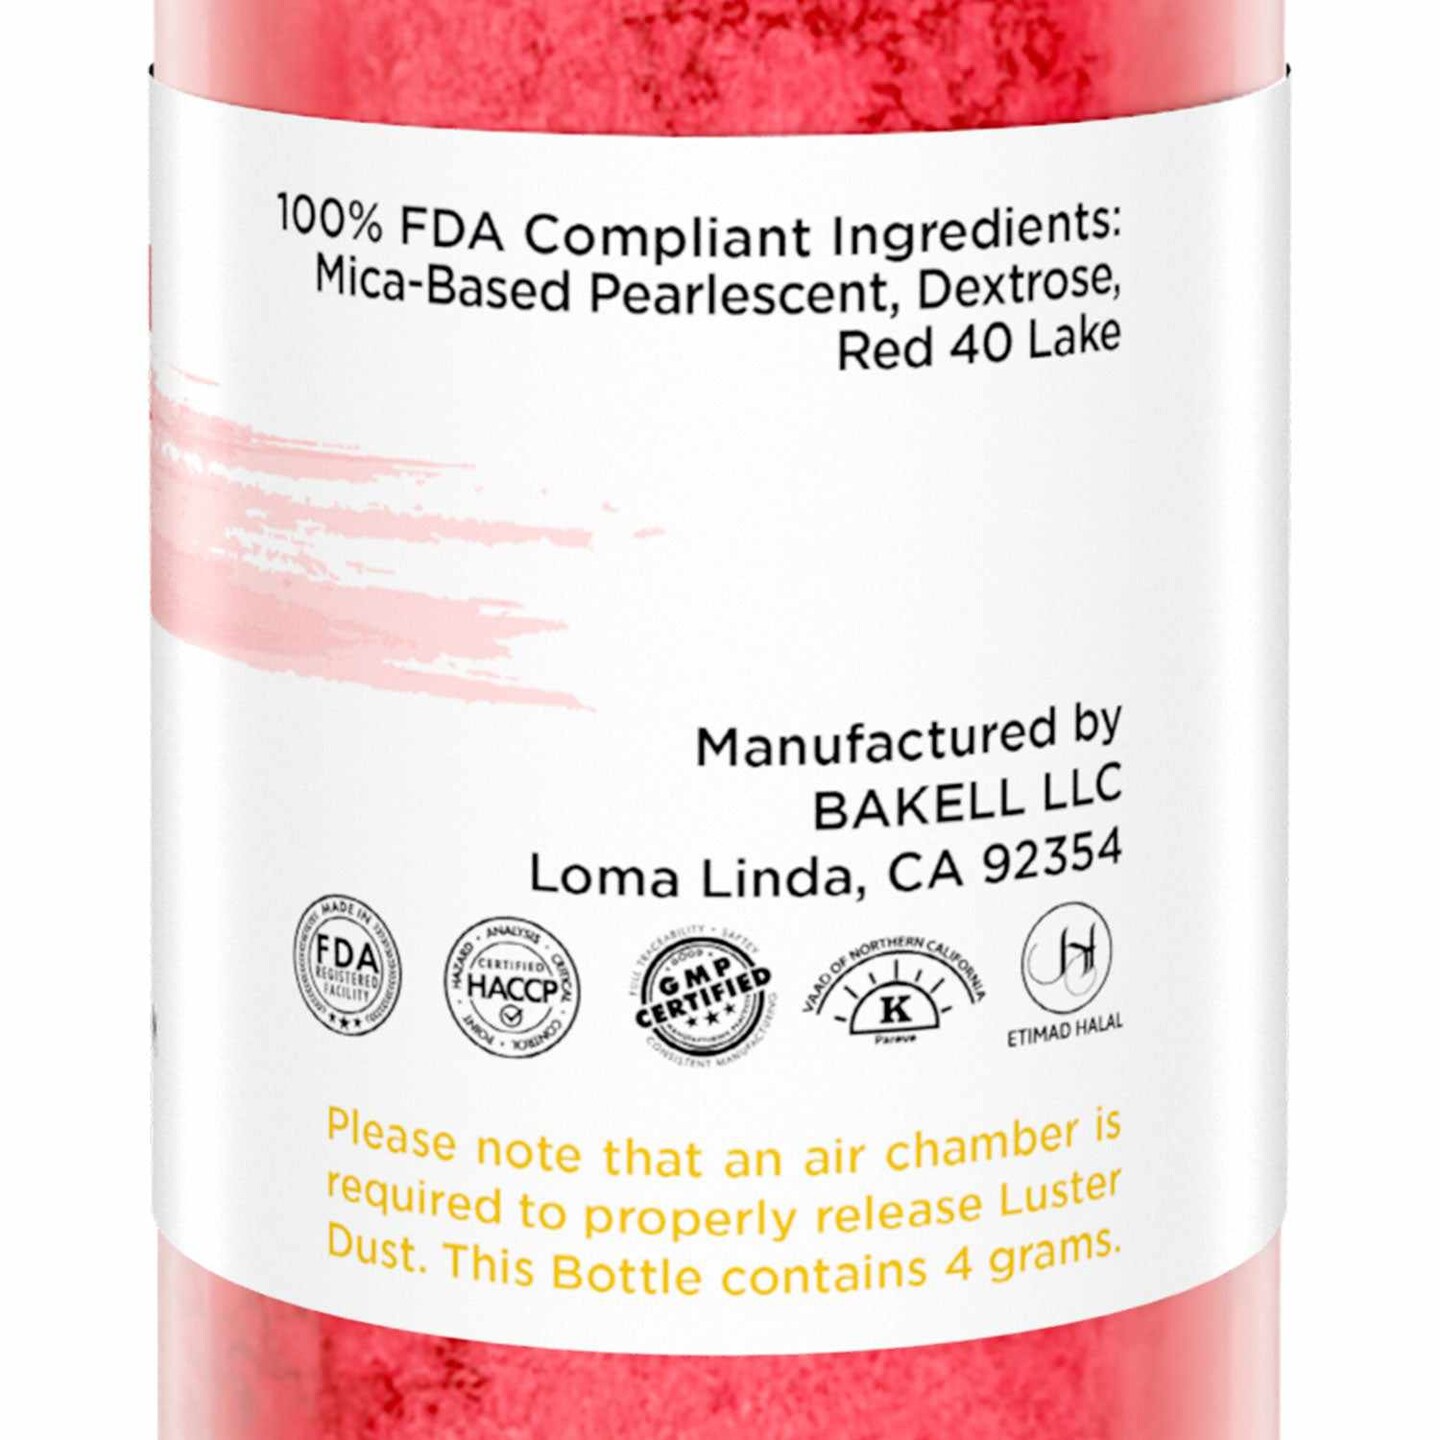 Classic Red Luster Dust Spray | Luster Dust Edible Glitter Spray Dust for Cakes, Cookies, Desserts, Paint. FDA Compliant (4 Gram Pump)